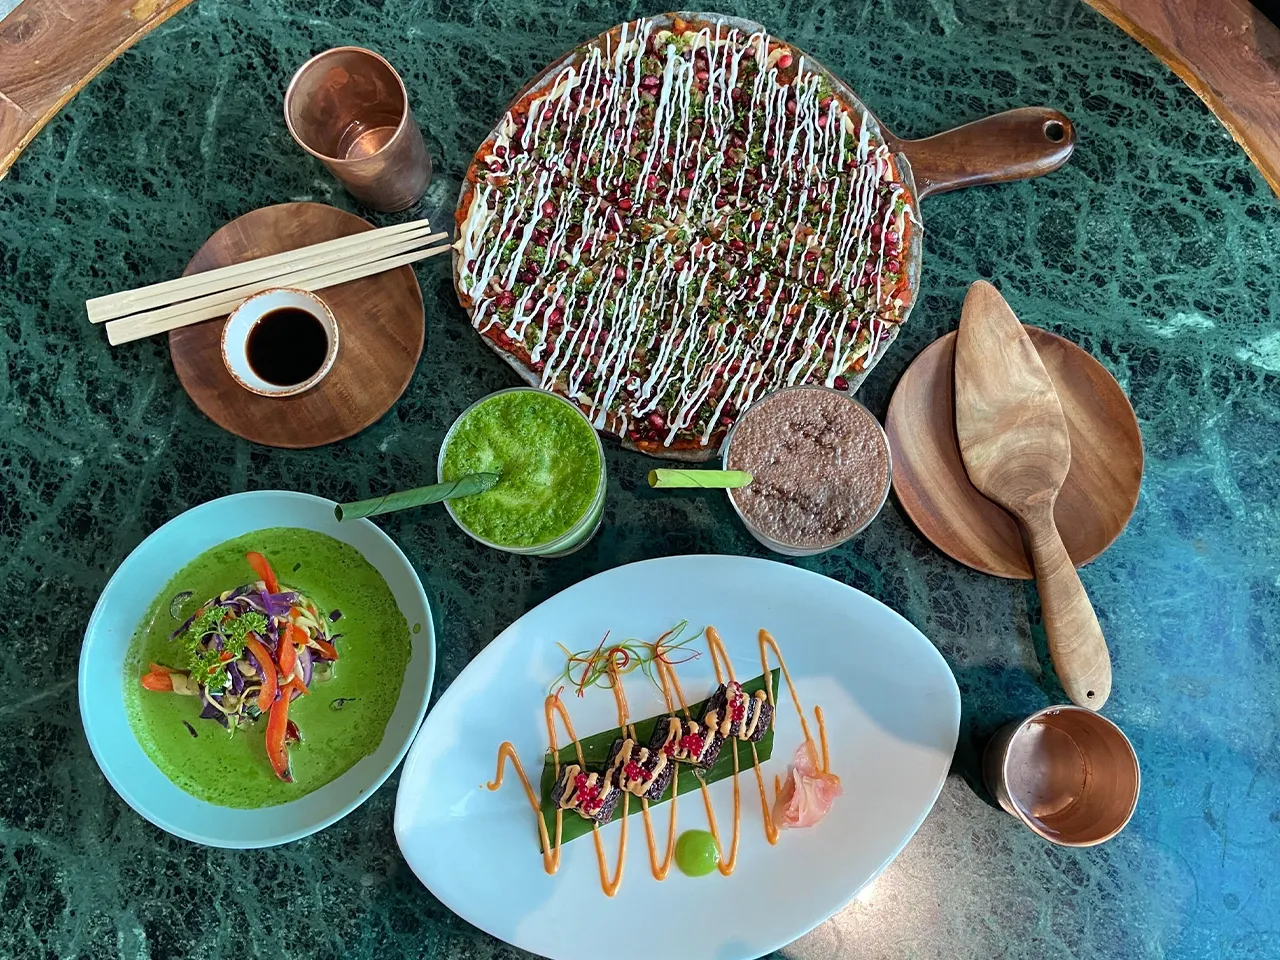 Sante Spa Cuisine: Here's why you should visit this vibrant spot in BKC, Mumbai!